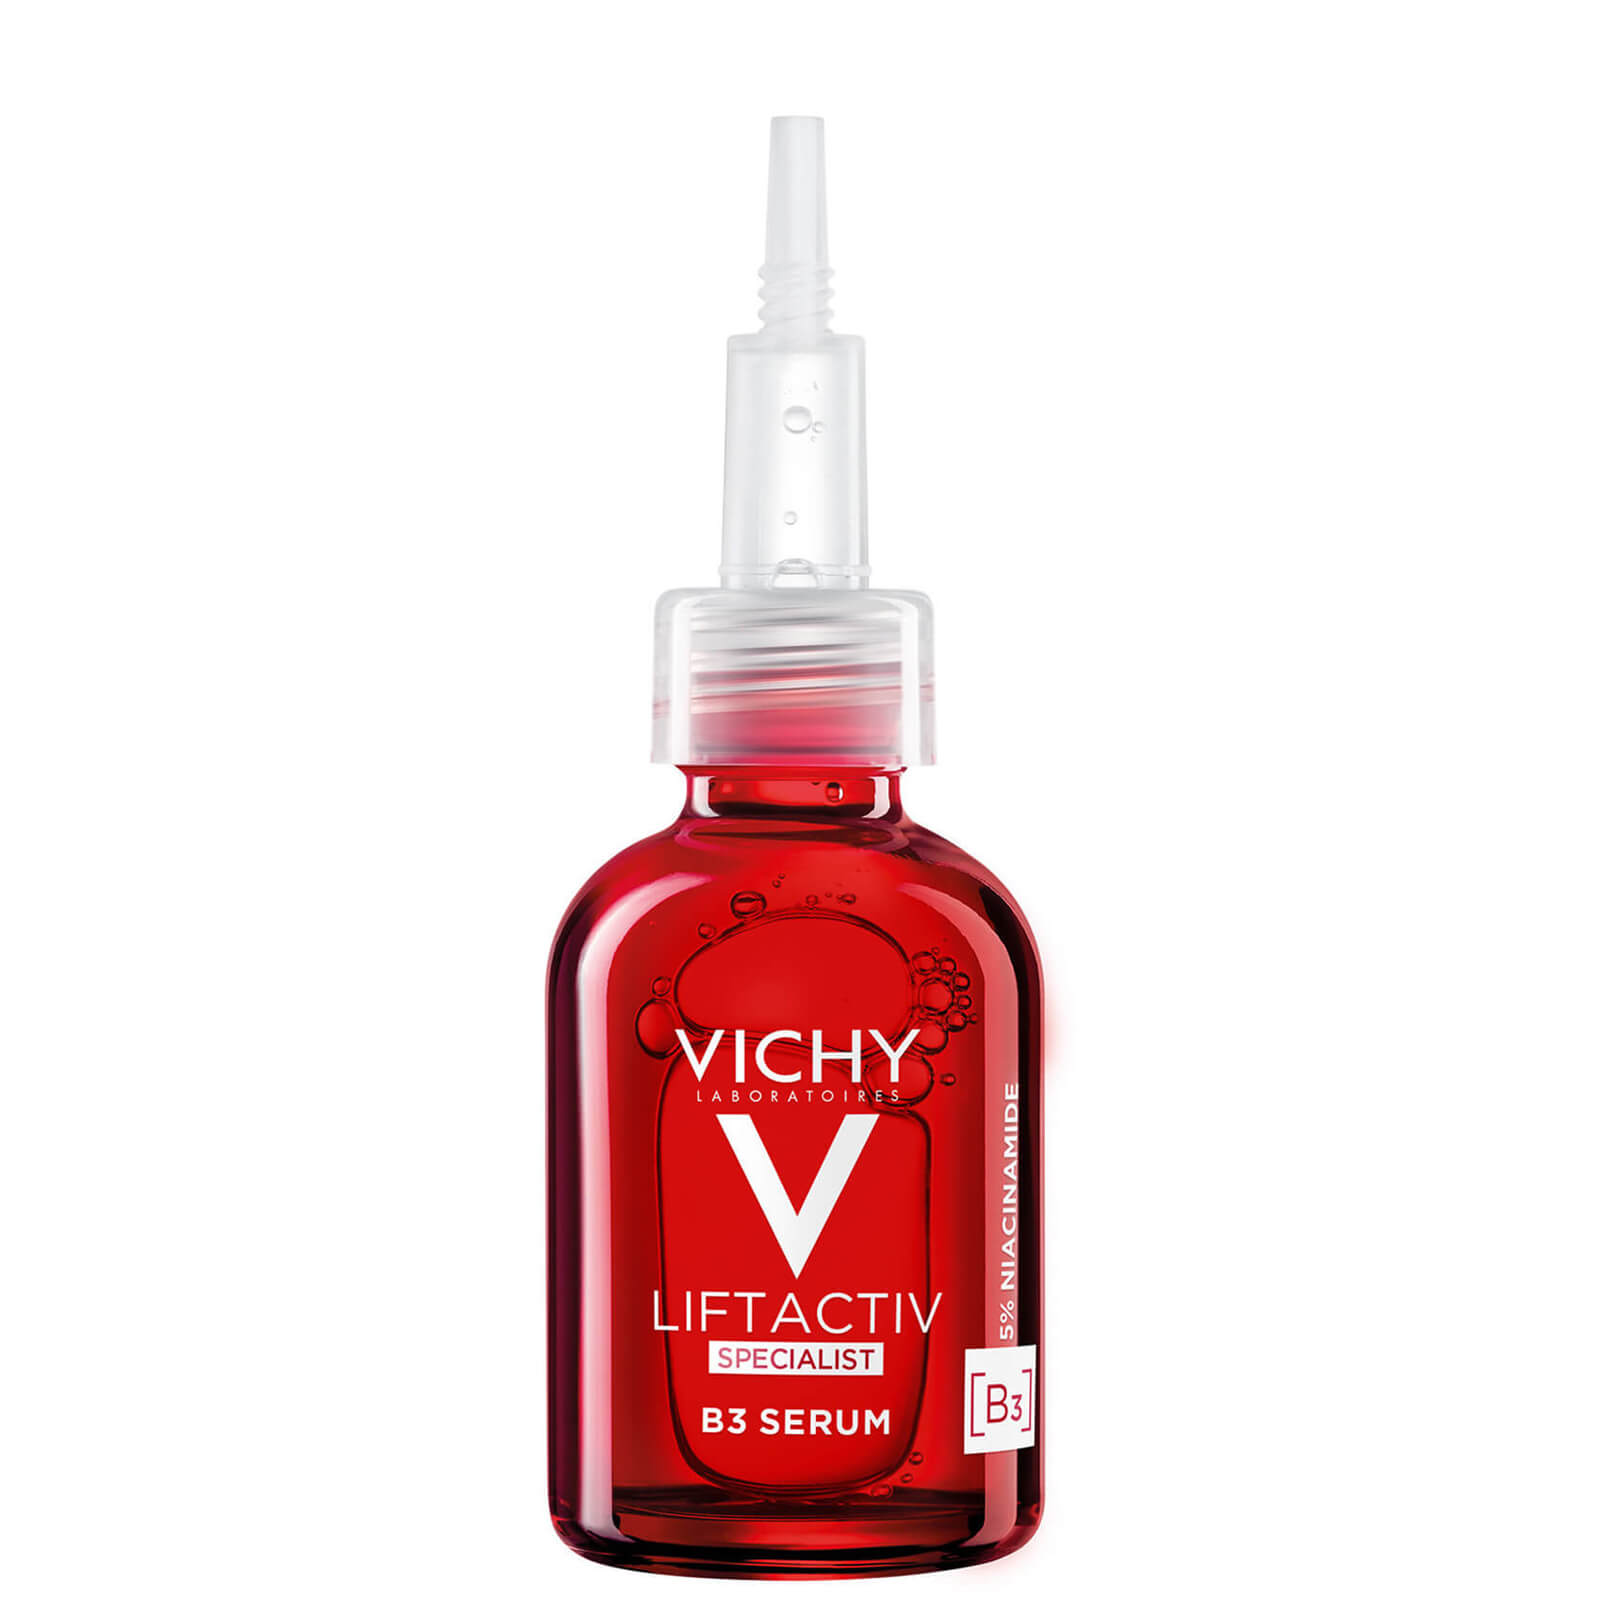 Vichy Liftactiv Specialist B3 Serum For Dark Spots And Wrinkles